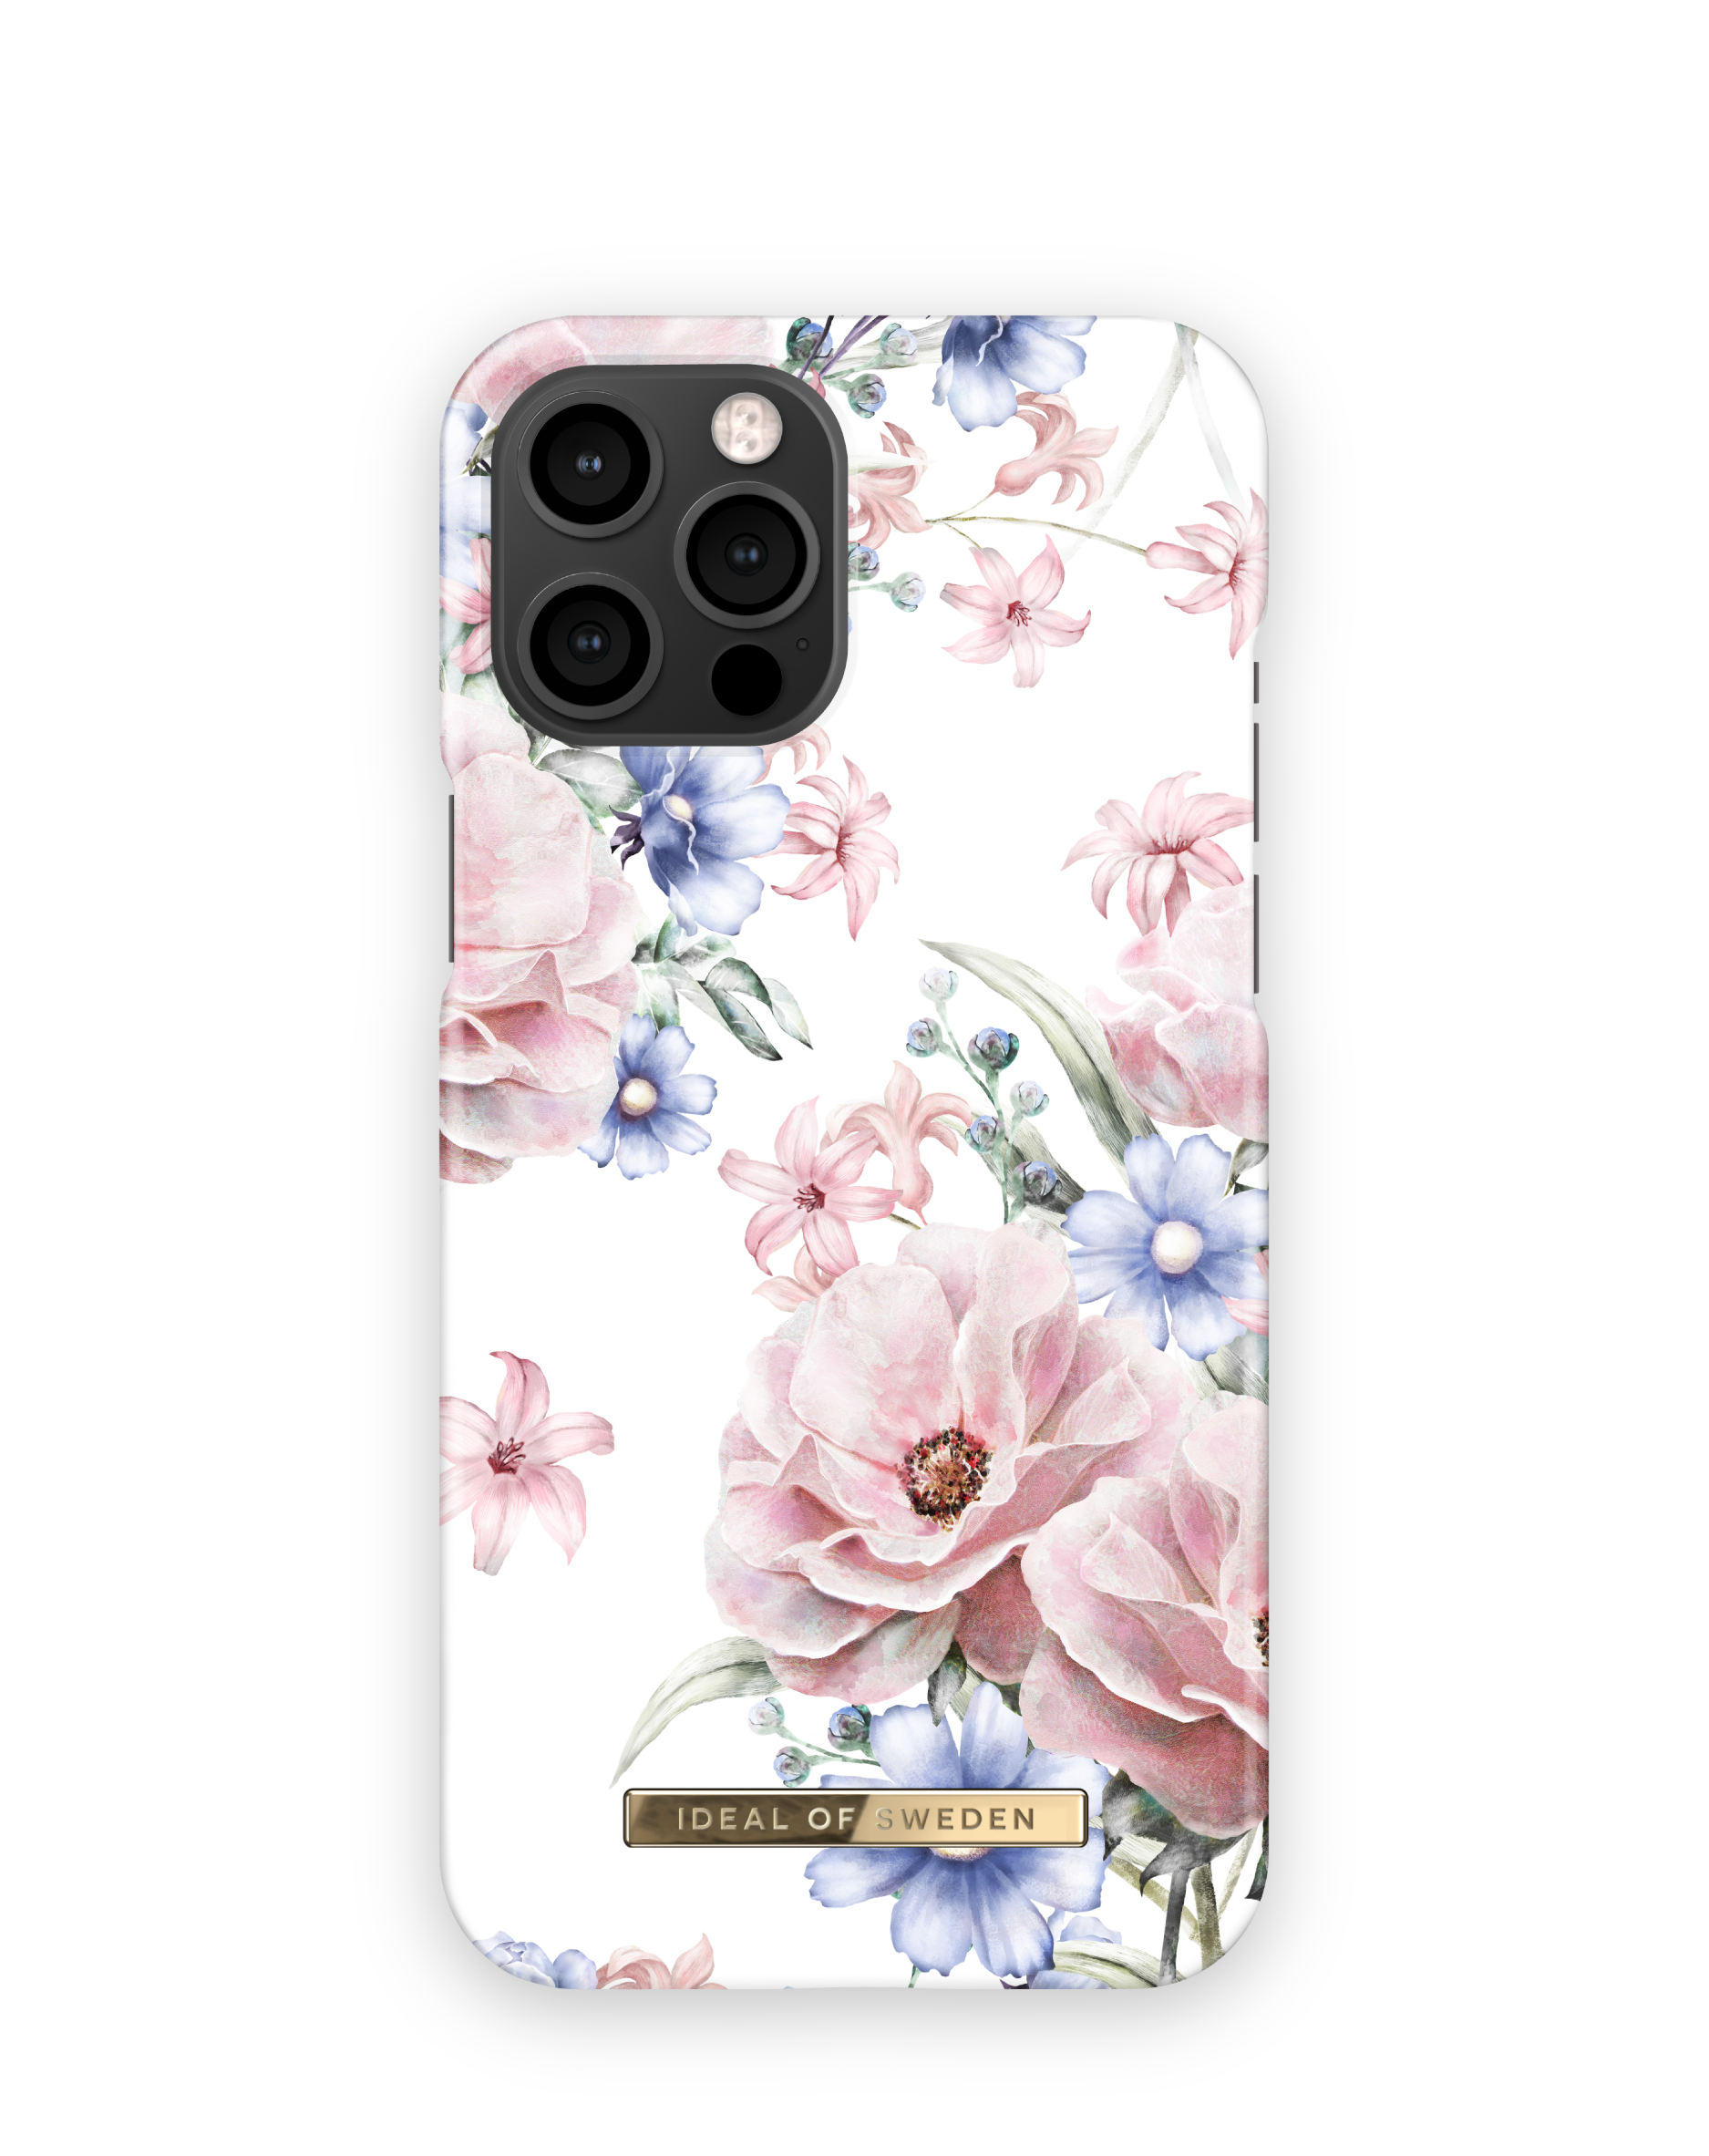 Floral Backcover, Max, iPhone 13 Romance SWEDEN IDEAL OF IDFCS17-I2167-58, Apple, Pro